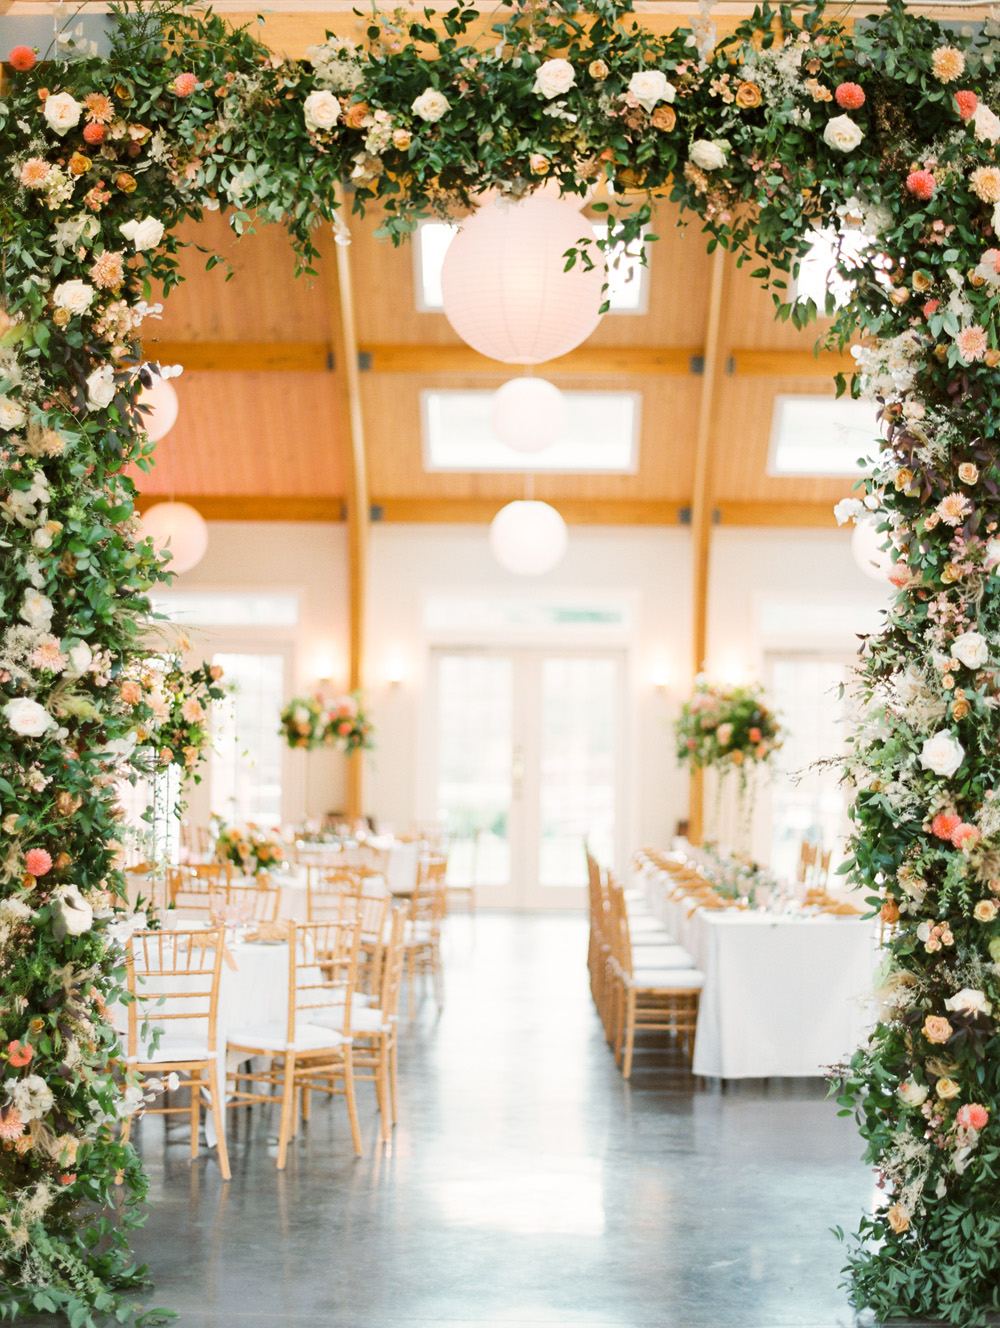 Floral Arch Installation at Full Moon Resort by Hops Petunia | Mary Dougherty Photography